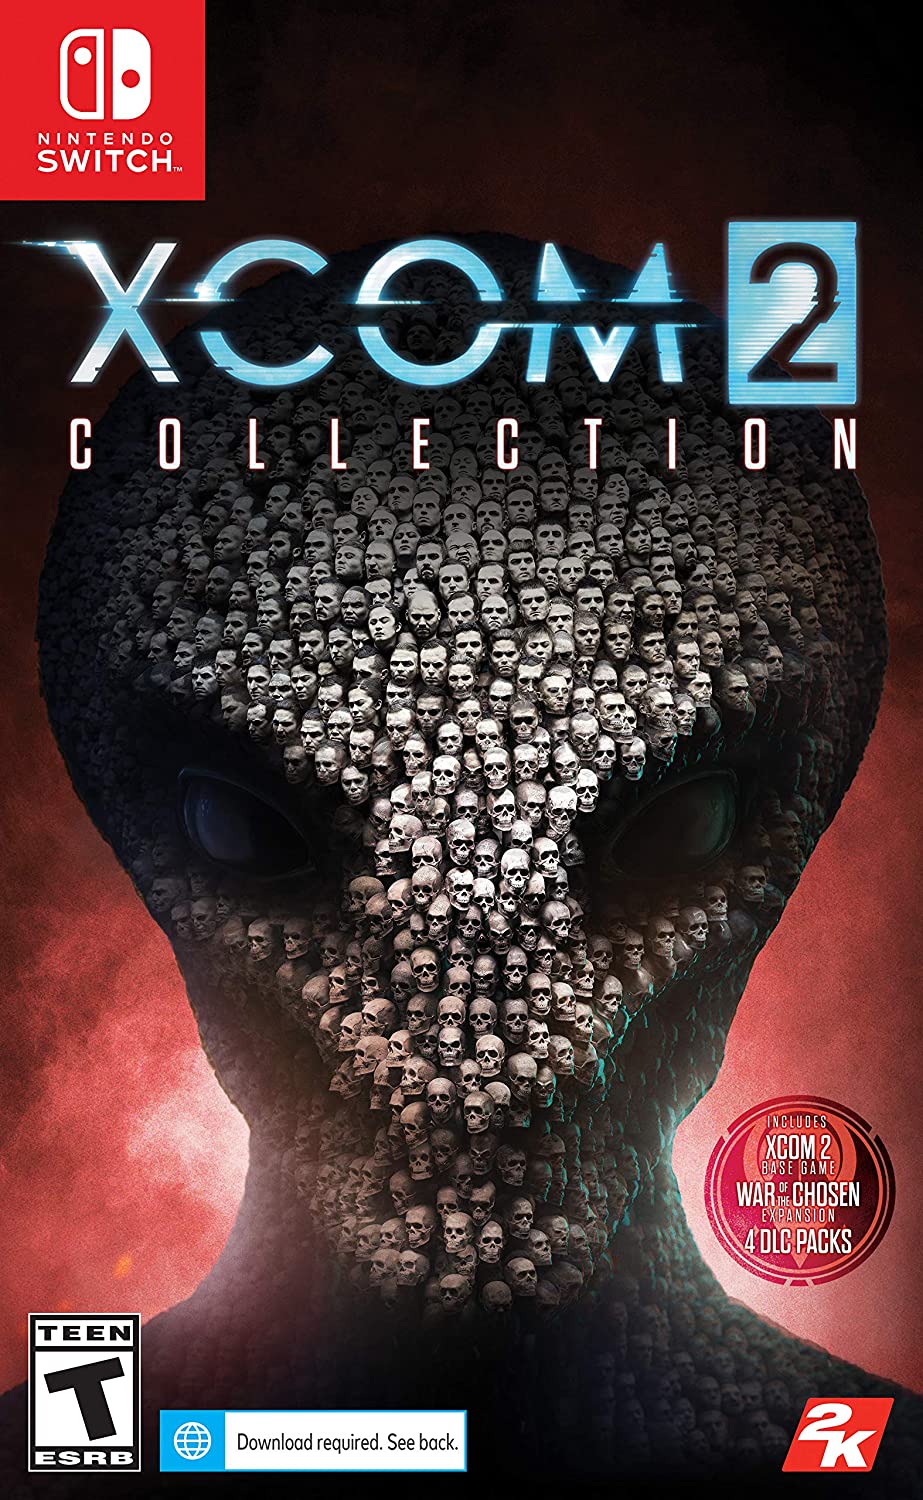 Xcom 2 Collection for Nintendo Switch